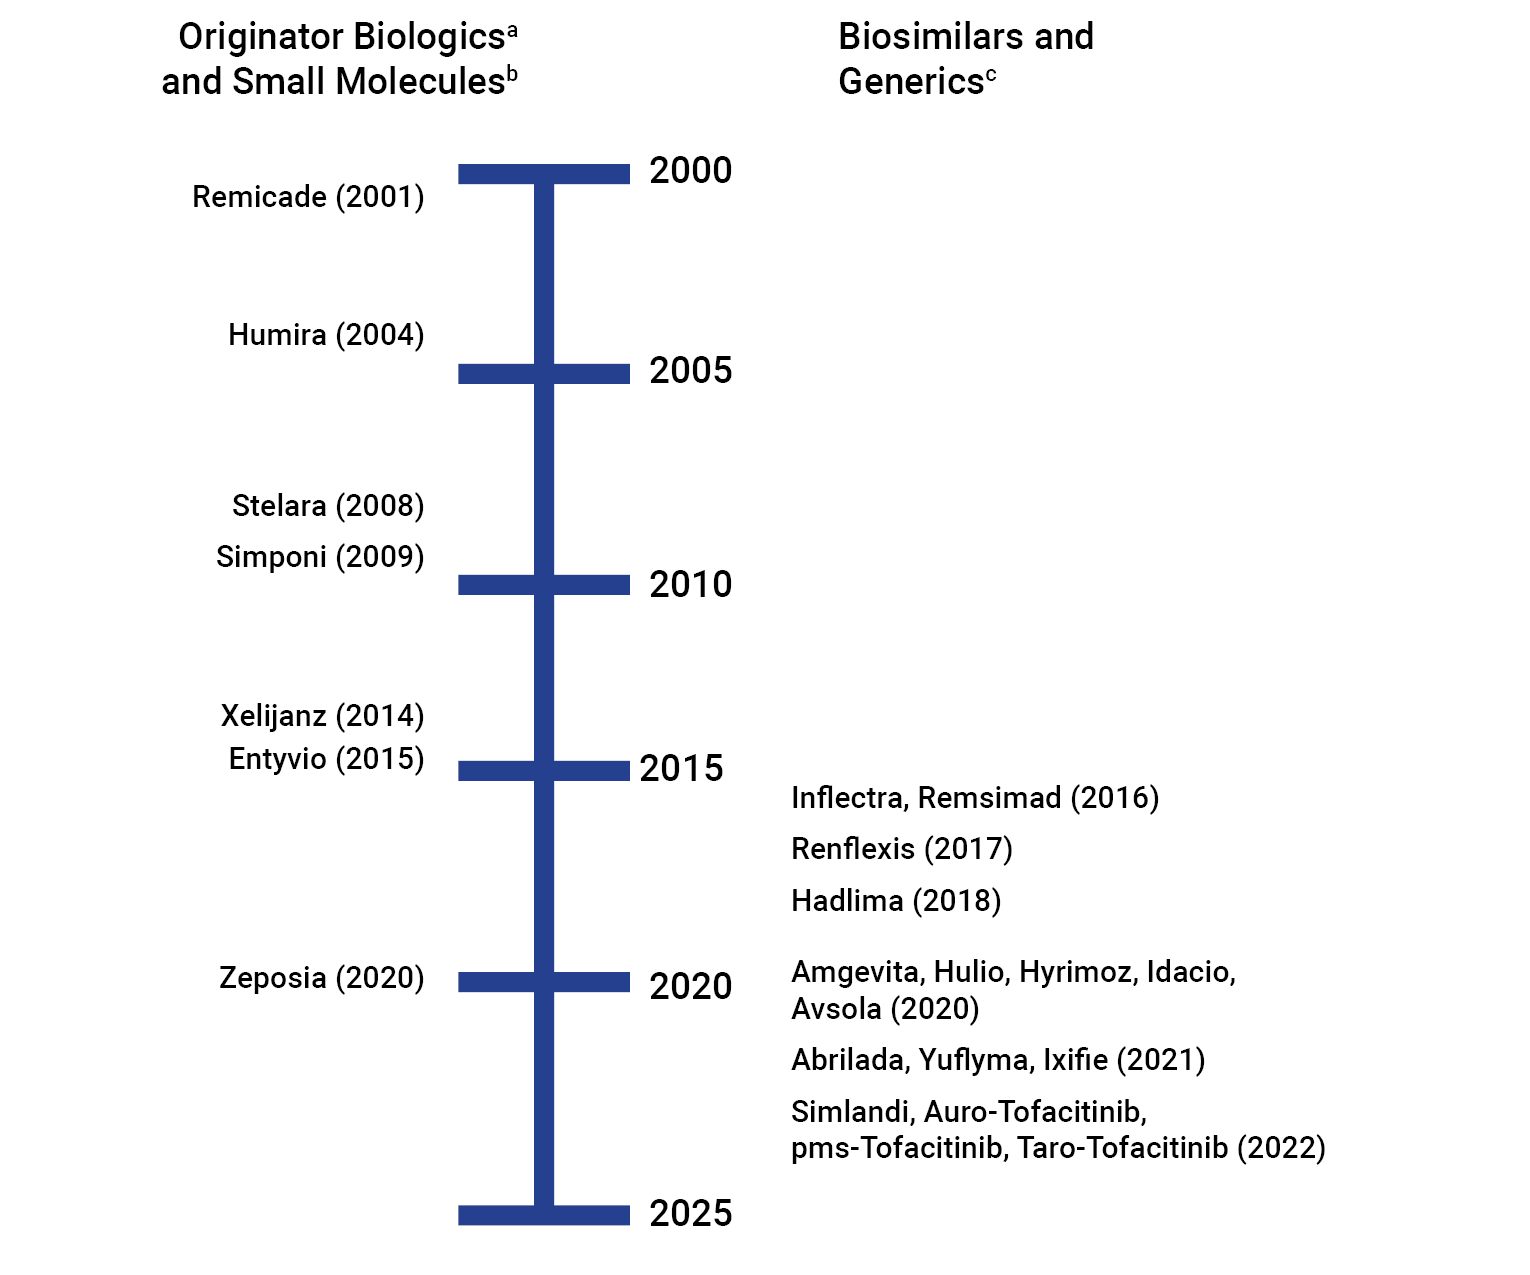 Figure 2 illustrates the approval timeline for originator biologics, small molecules, and the available generic or biosimilar versions by Health Canada by first NOC date. The timeline begins with the approval of Remicade in 2001 and ends with Taro-Tofacitinib in 2022.